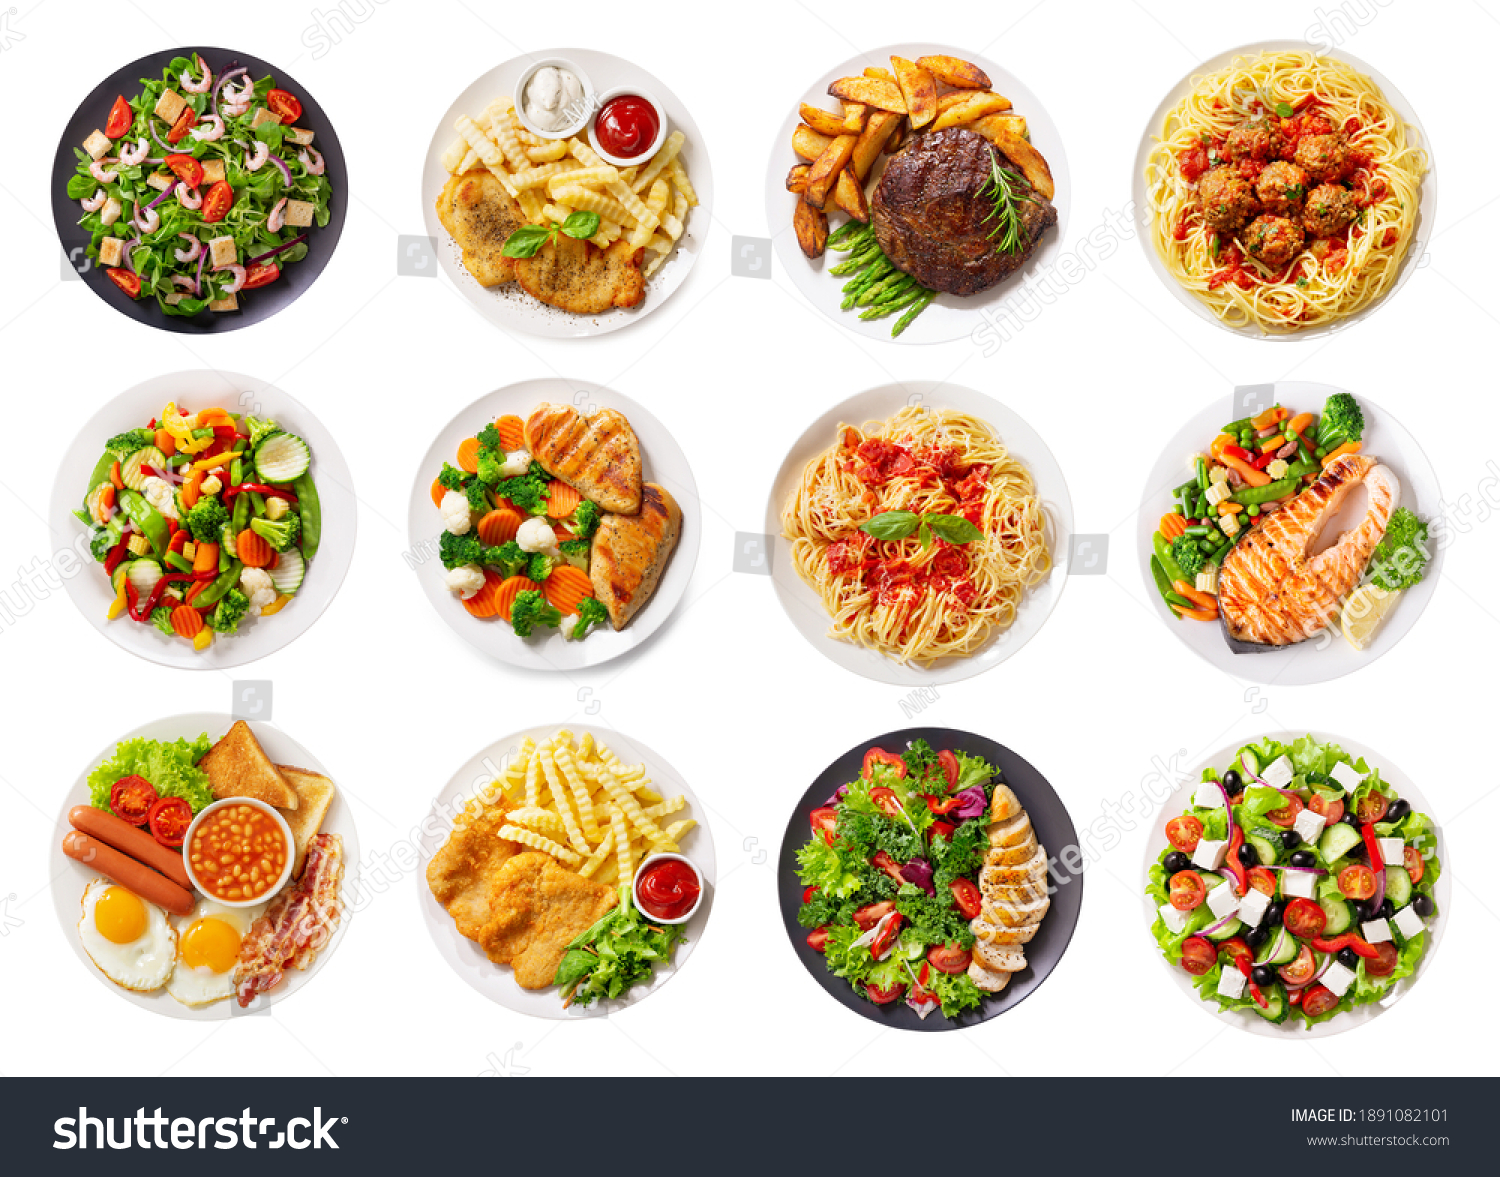 set of various plates of food isolated on a white background, top view #1891082101